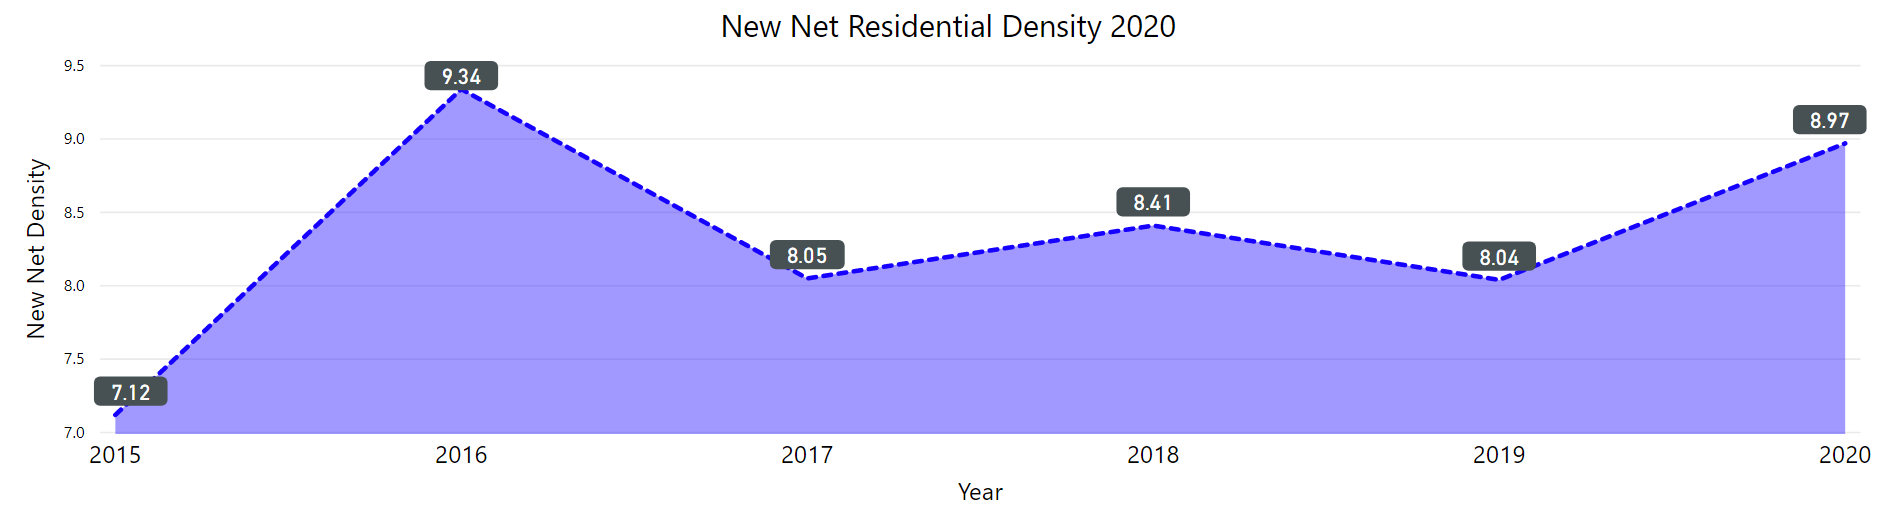 graph of new net residential density from 2015 to 2020. The rate went up from 2015 to 2016 and then dipped in 2017 and remained faily consistent through 2019. In 2020 it increased again.